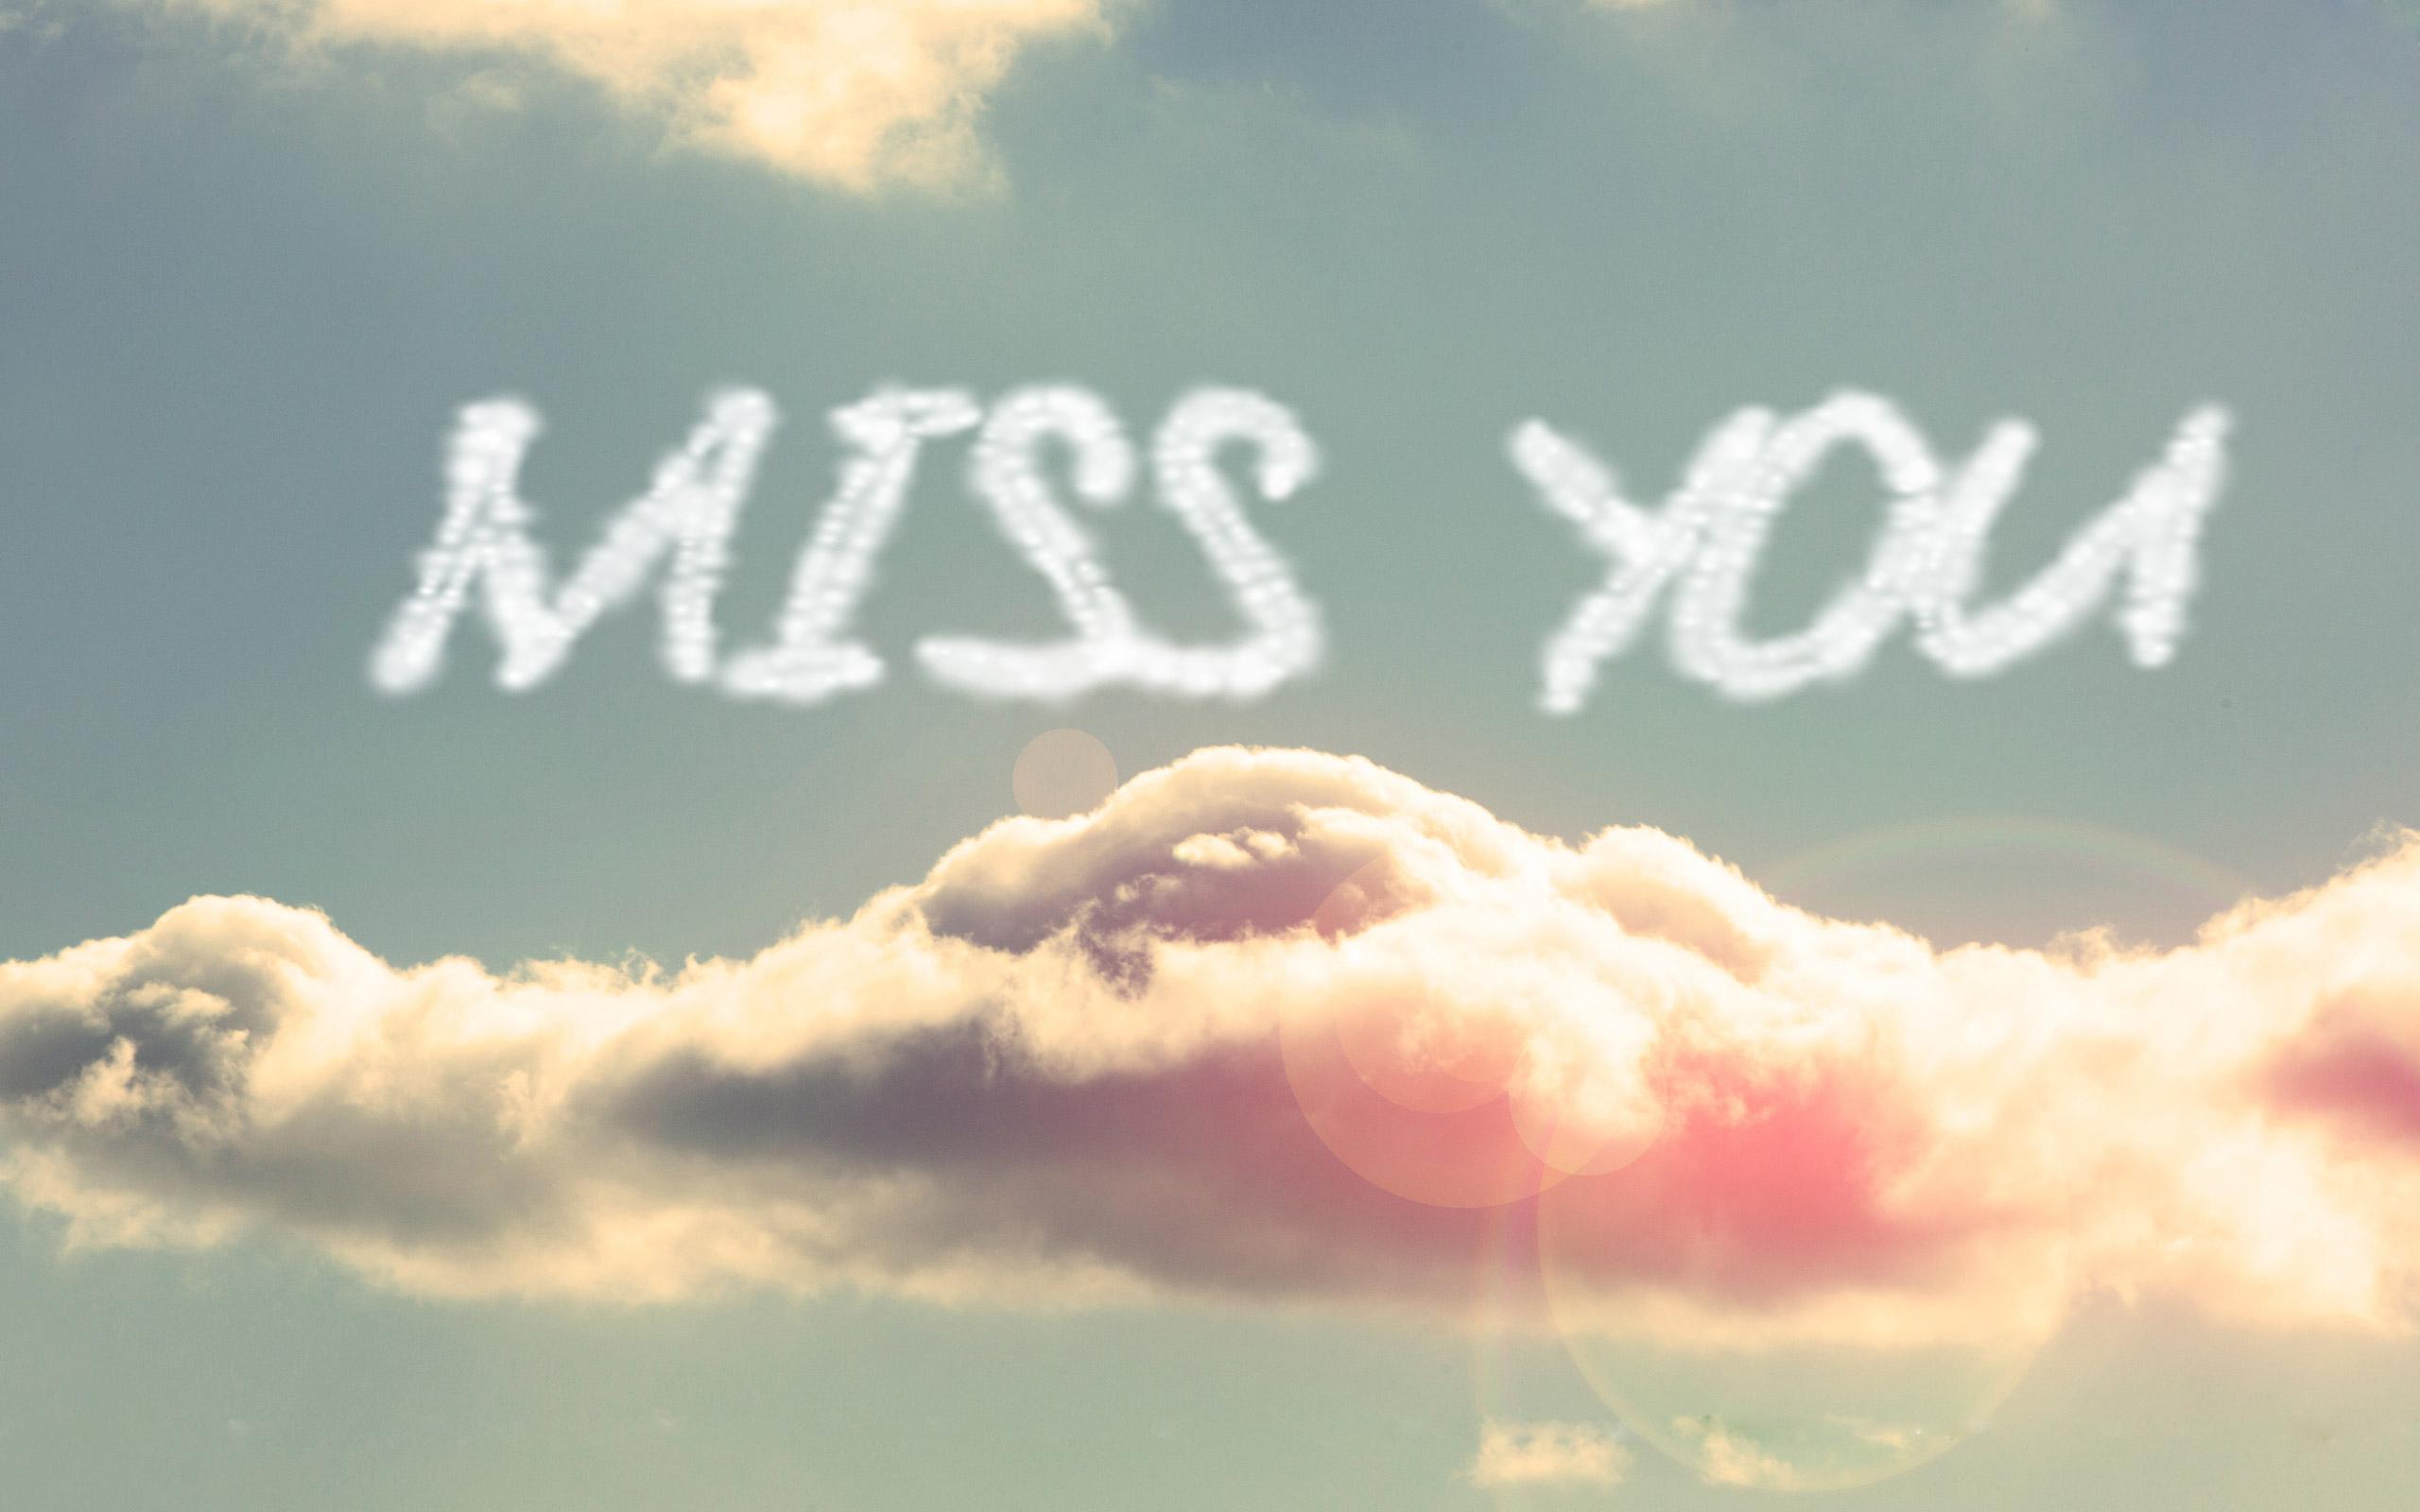 Missing You Background. Missing